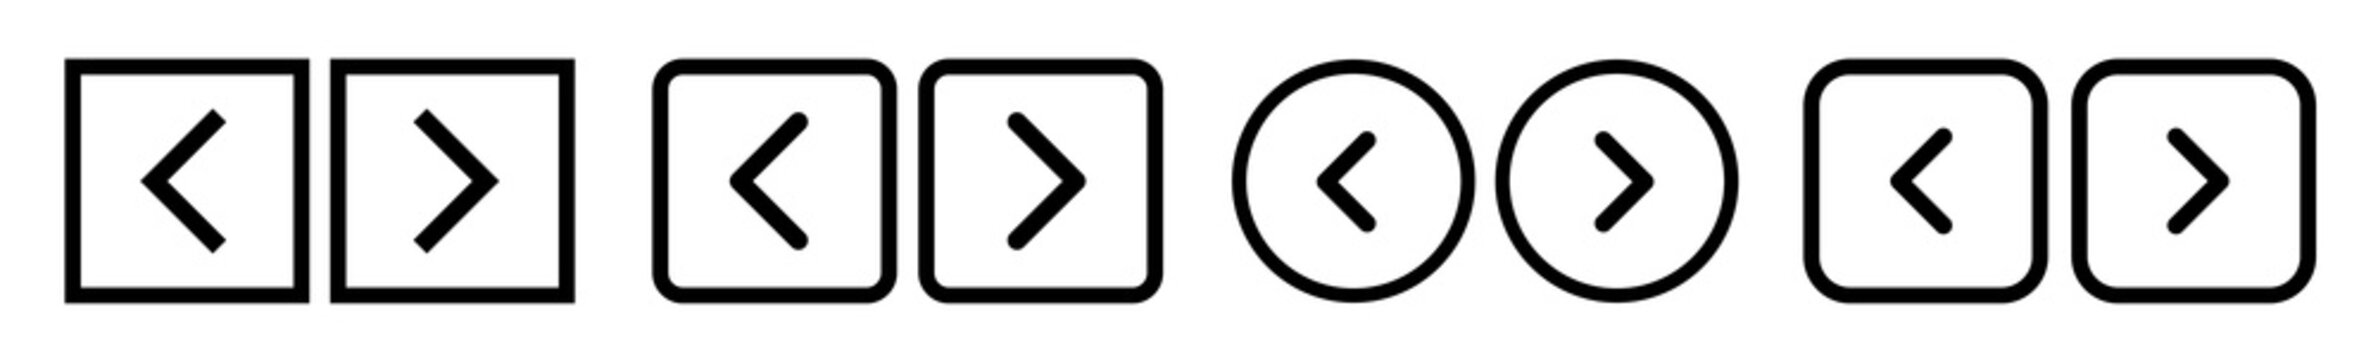 Back Next Button Icon Black Line | Previous Forward Buttons Illustration | Video Audio Player Navigate Symbol | Left Right Logo | Game Arrow Sign | Isolated | Variations